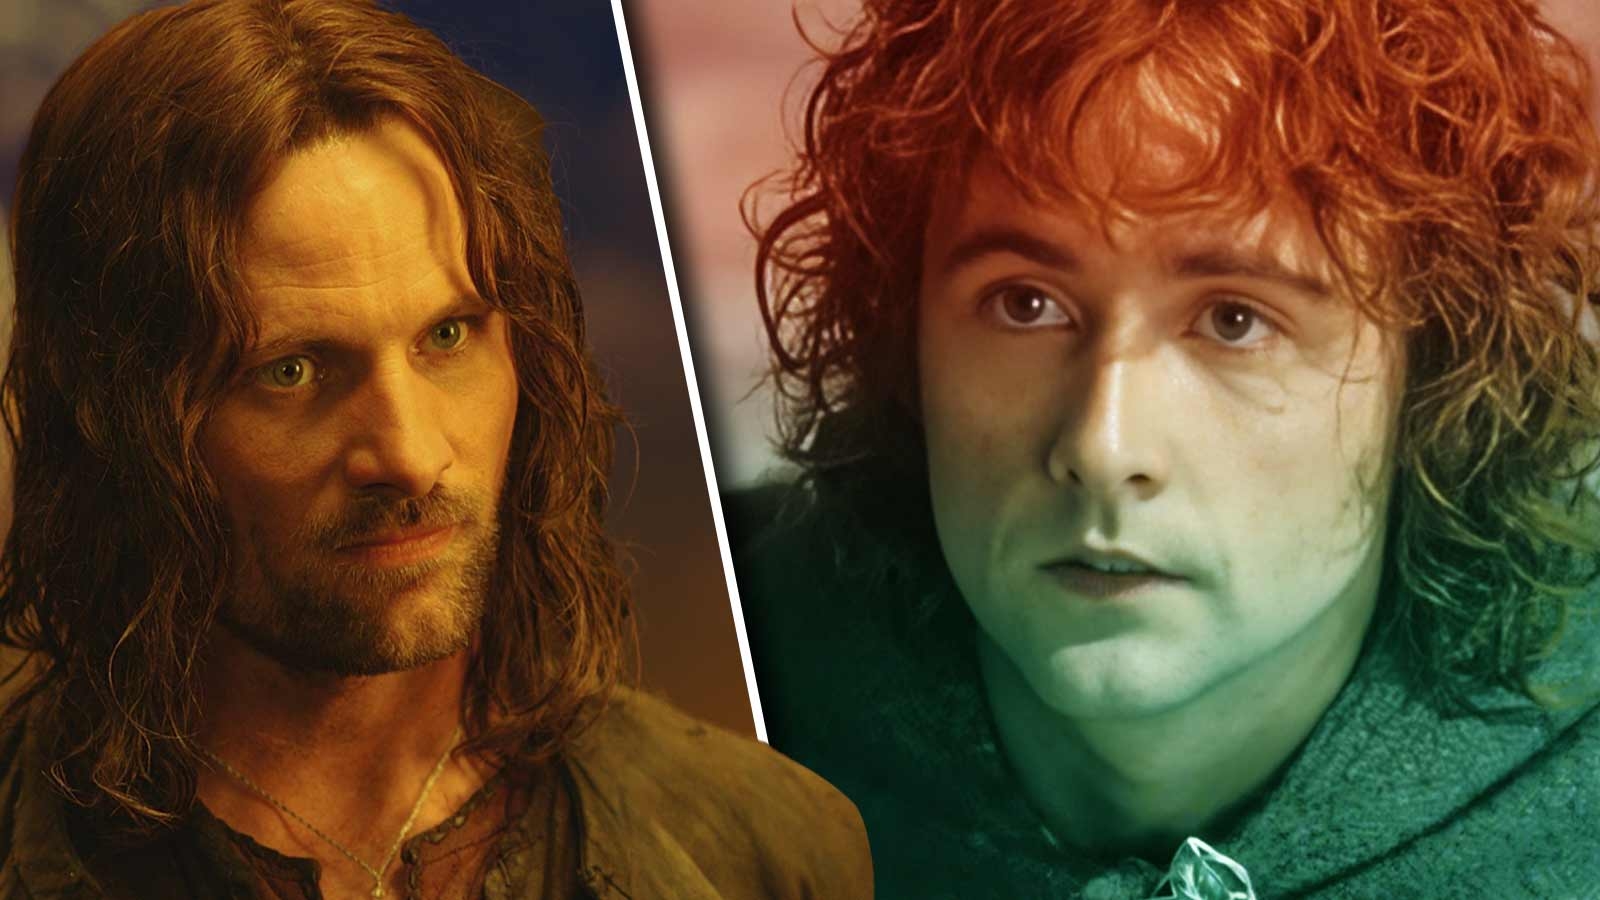 “The story of how Viggo kissed me”: Despite Starring in the Most Epic Trilogy of All Time, Billy Boyd’s “Favorite” Memory From ‘Lord of the Rings’ Happened Off-Screen